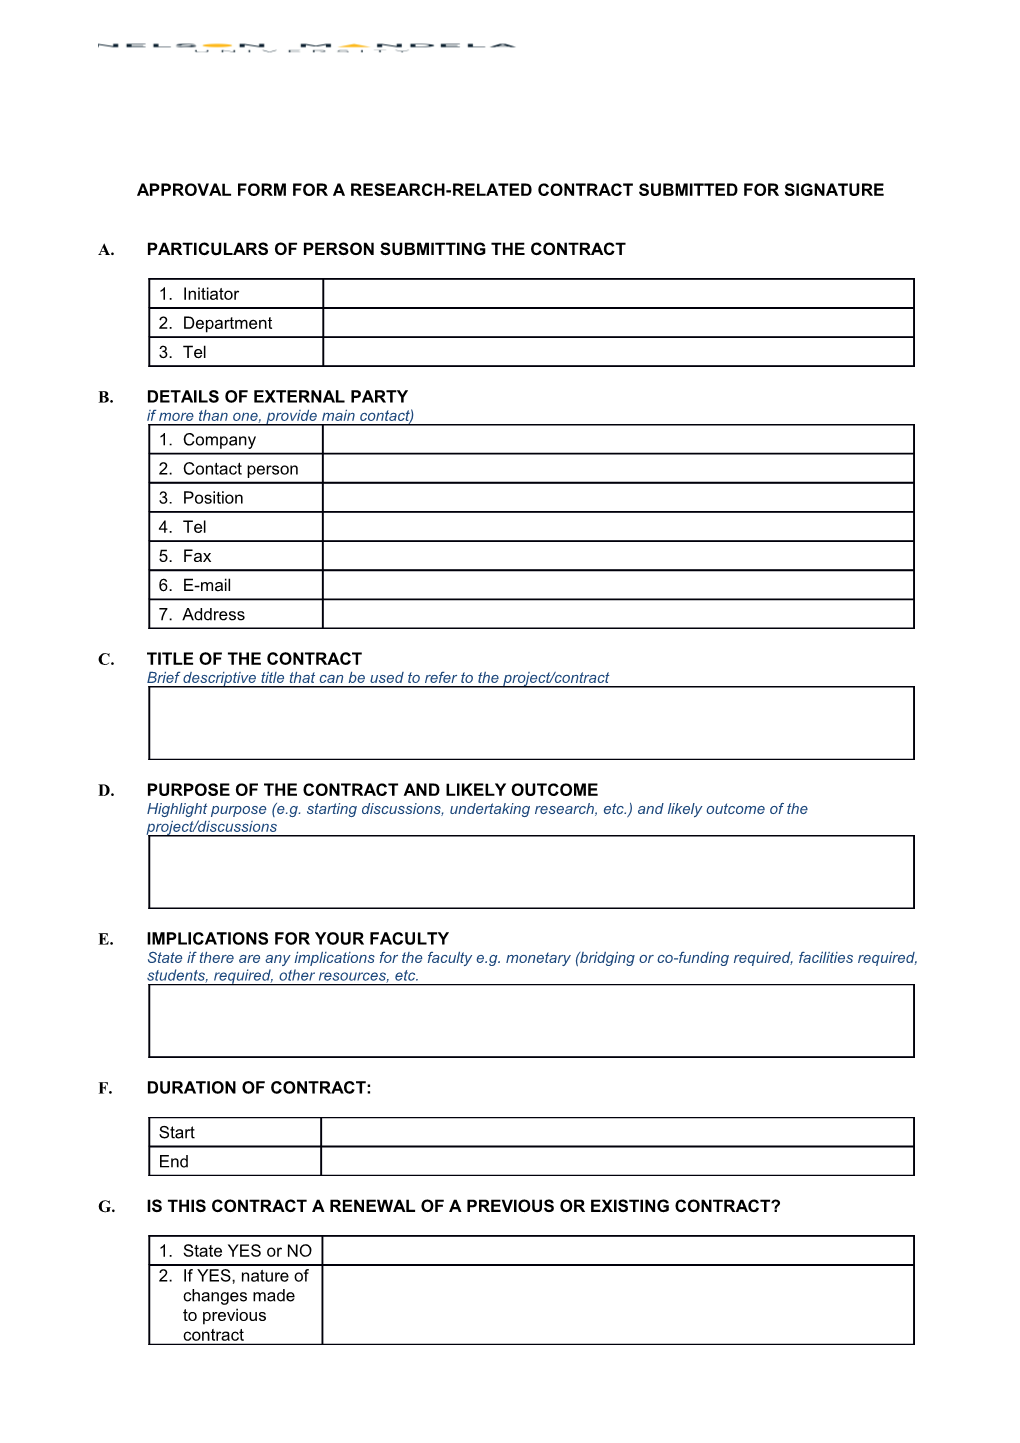 Approval Form for a Research-Related Contract Submitted for Signature